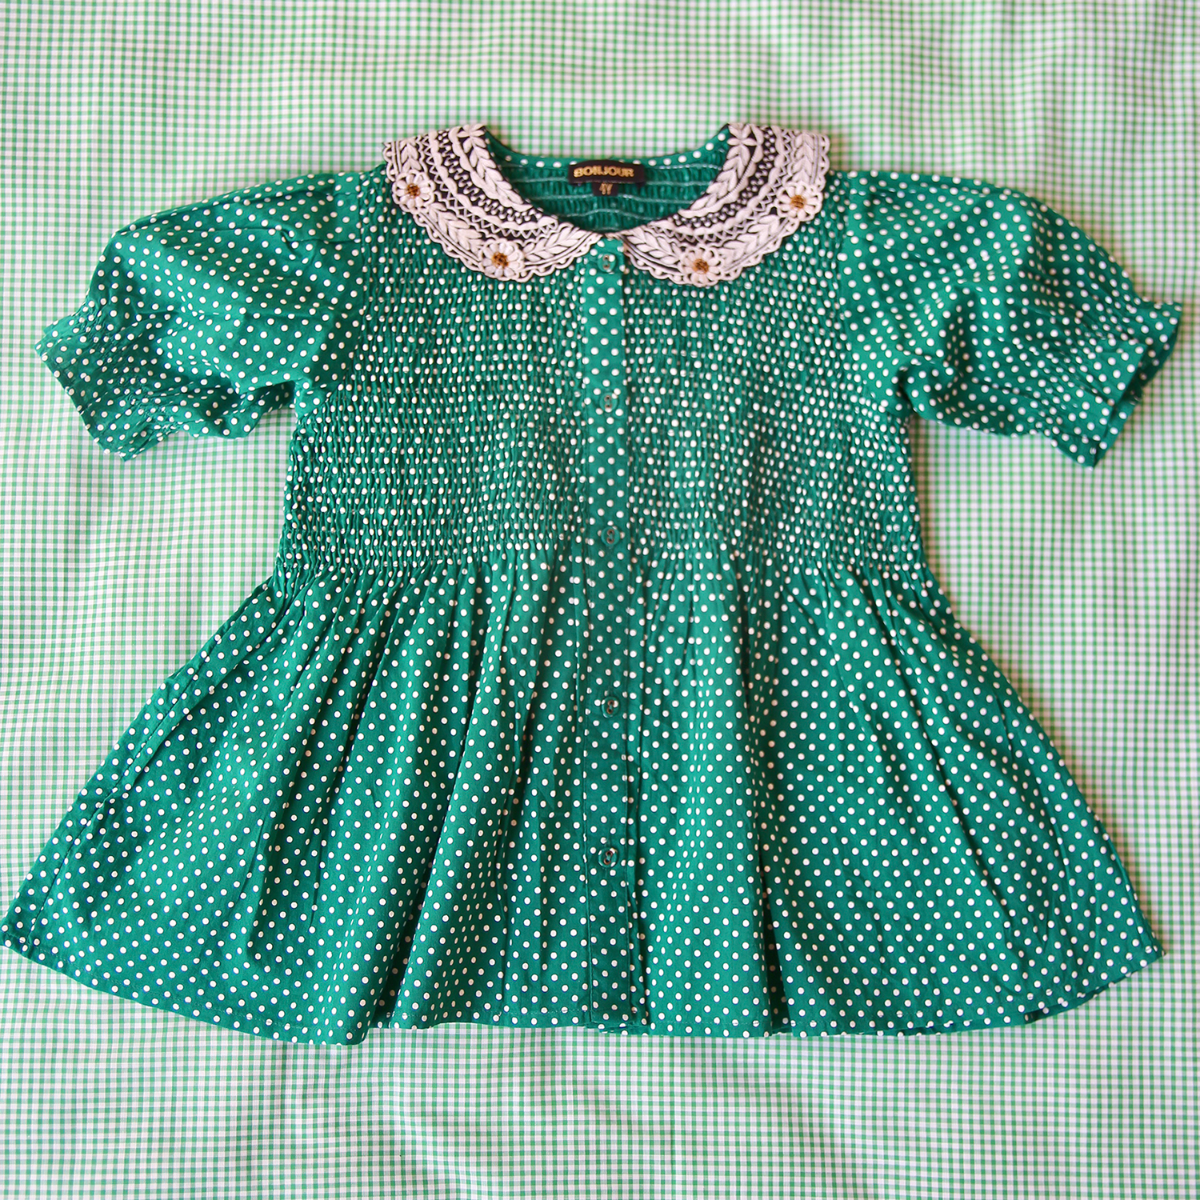 Blouse with embroidery collar(Green dots)